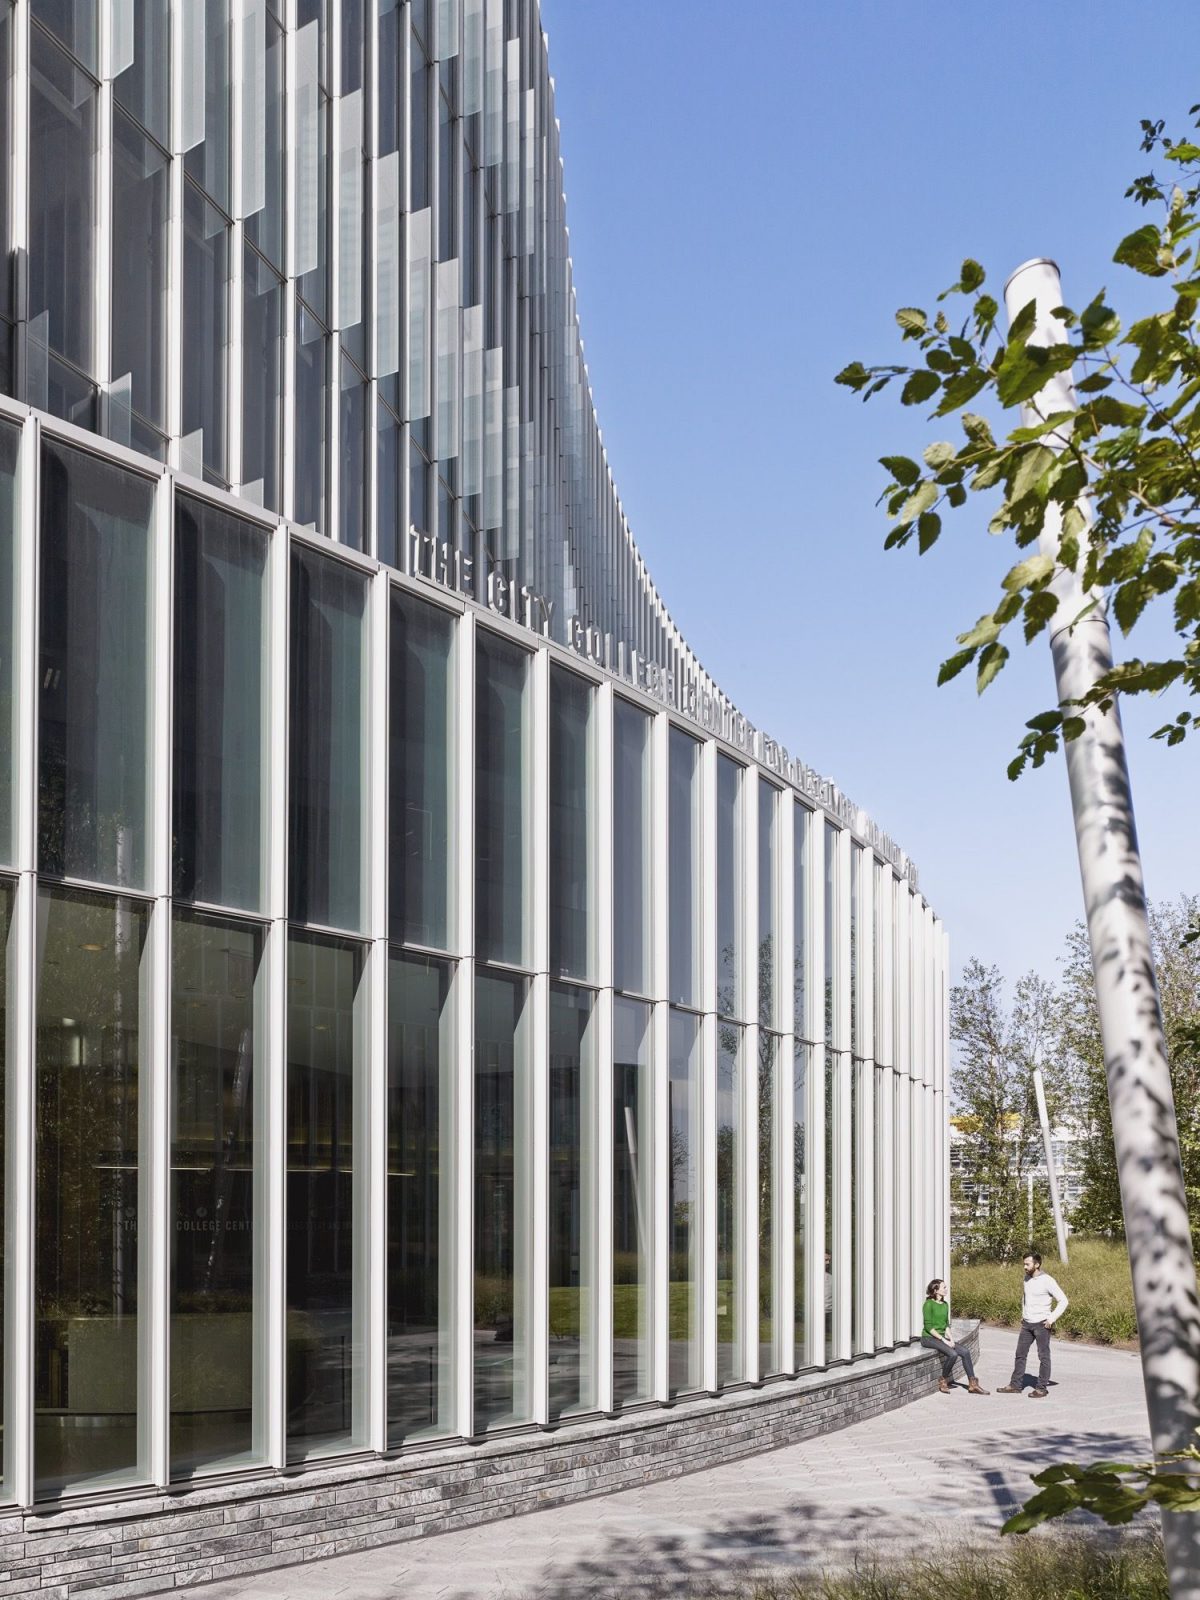 CUNY Advanced Science Research Center | Flad Architects + KPF - Arch2O.com